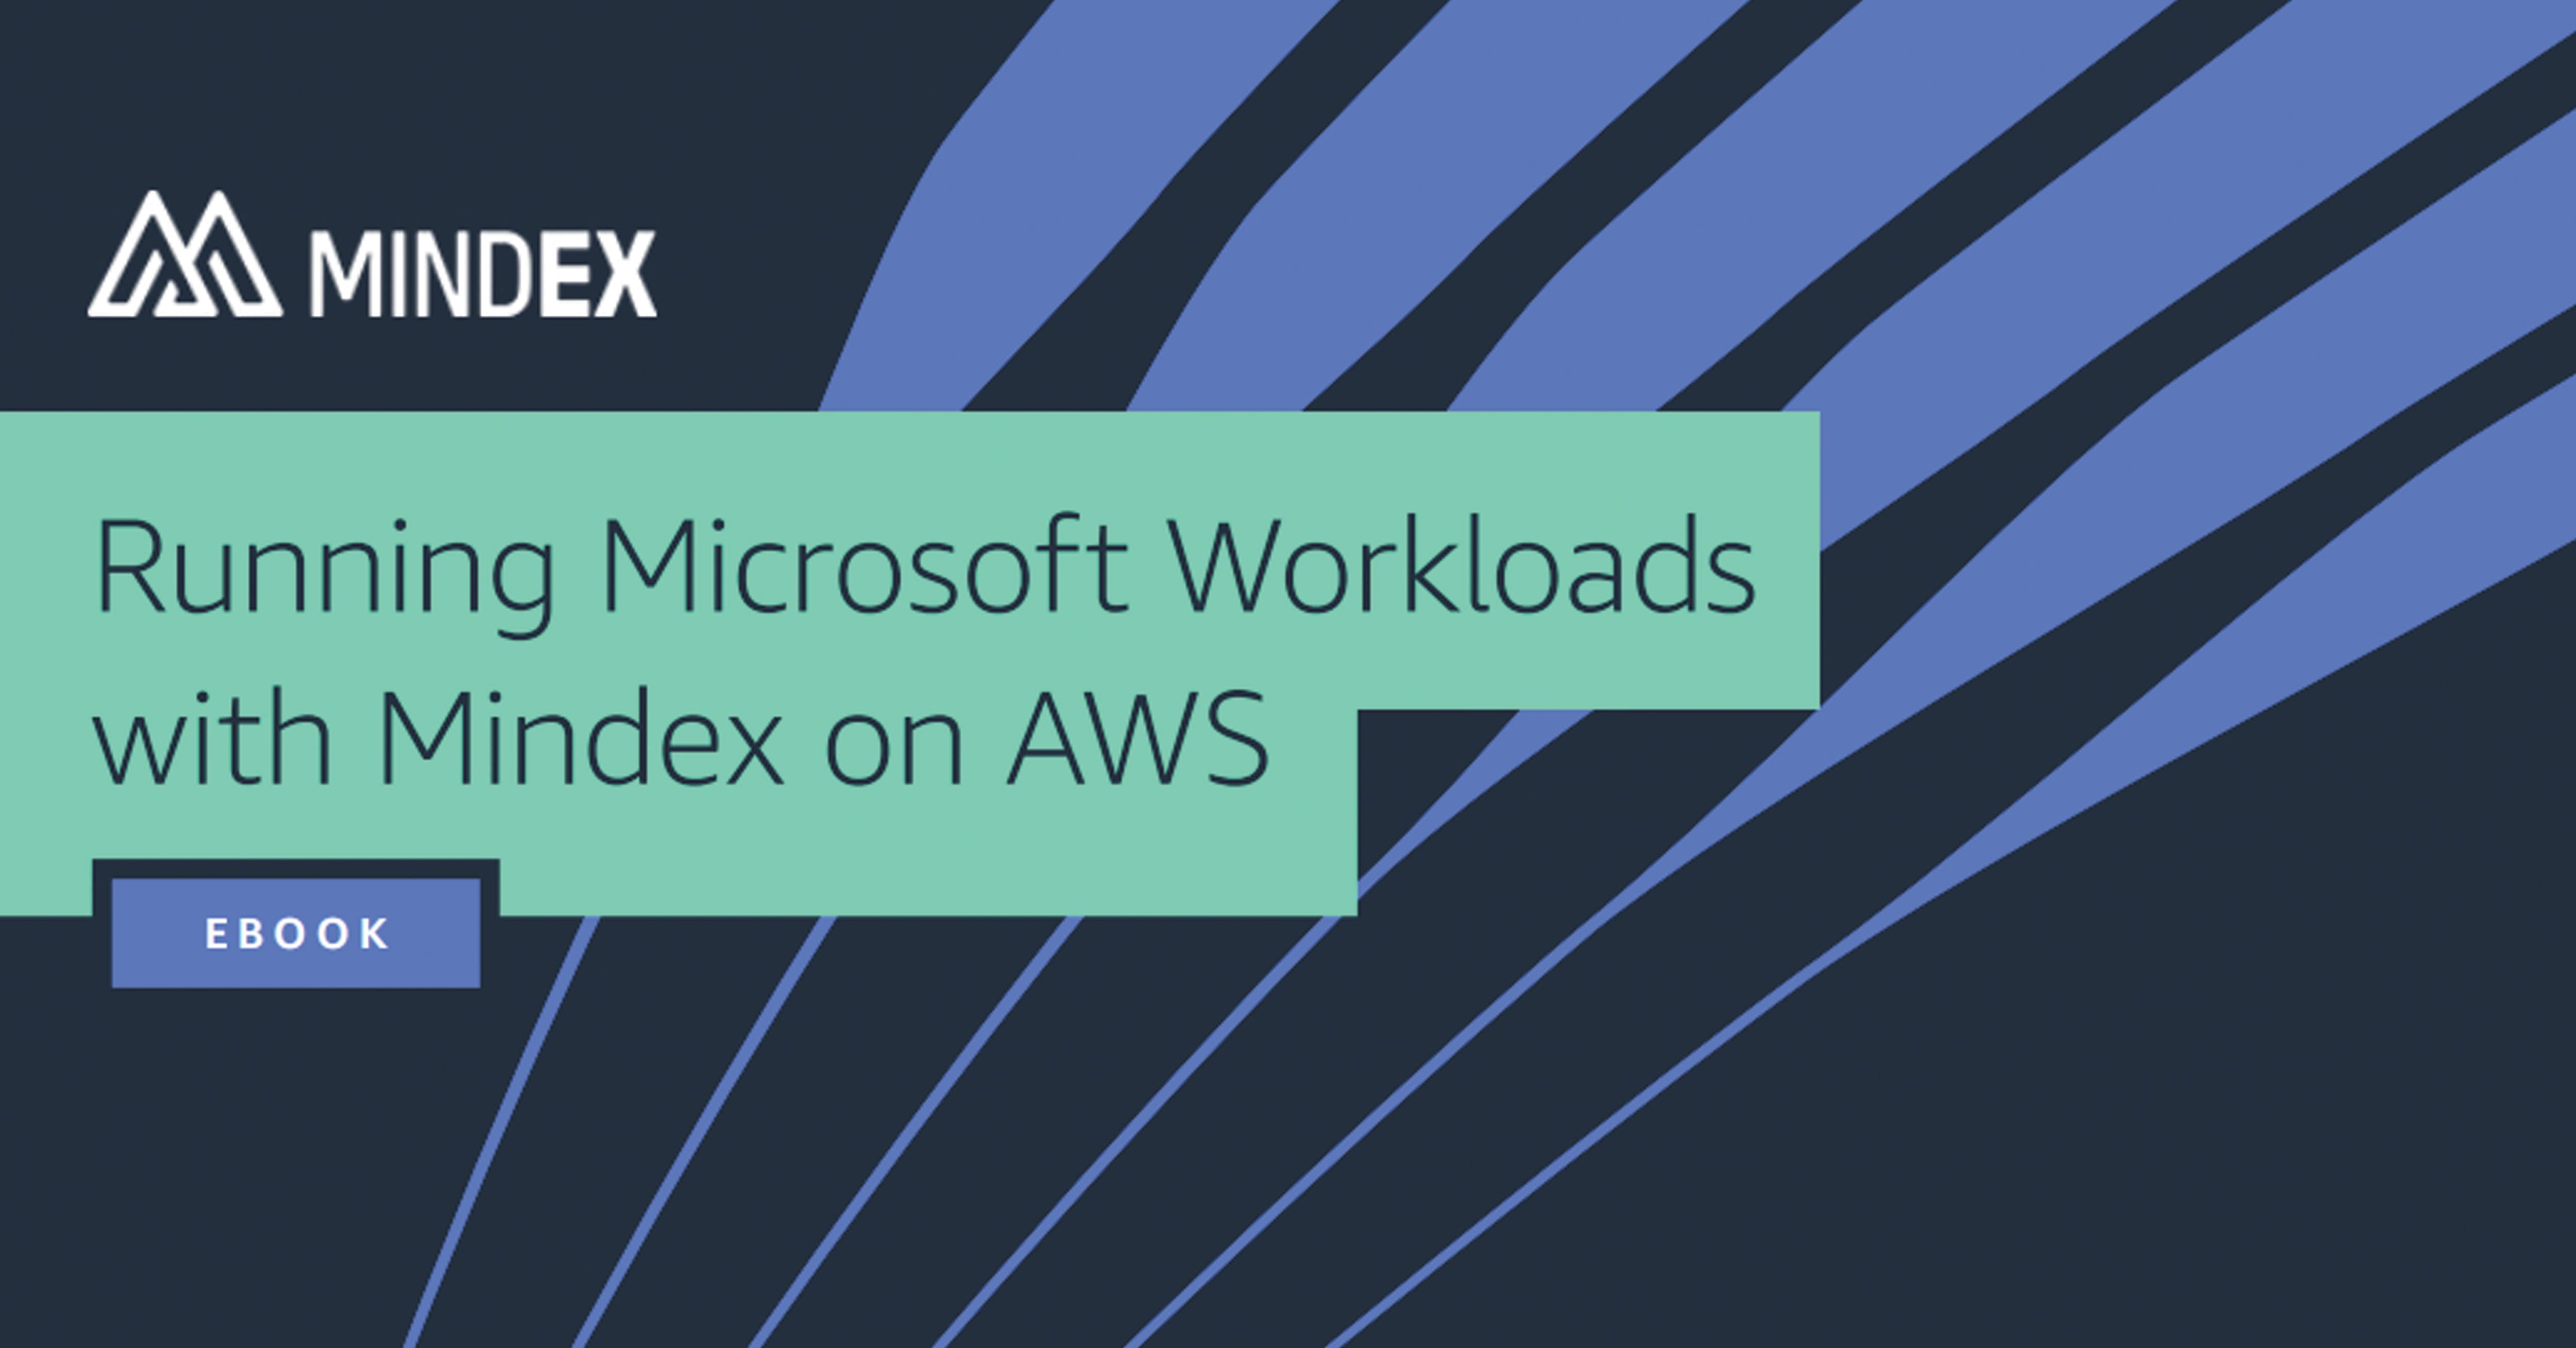 eBook - Running Microsoft Workloads with Mindex on AWS-final